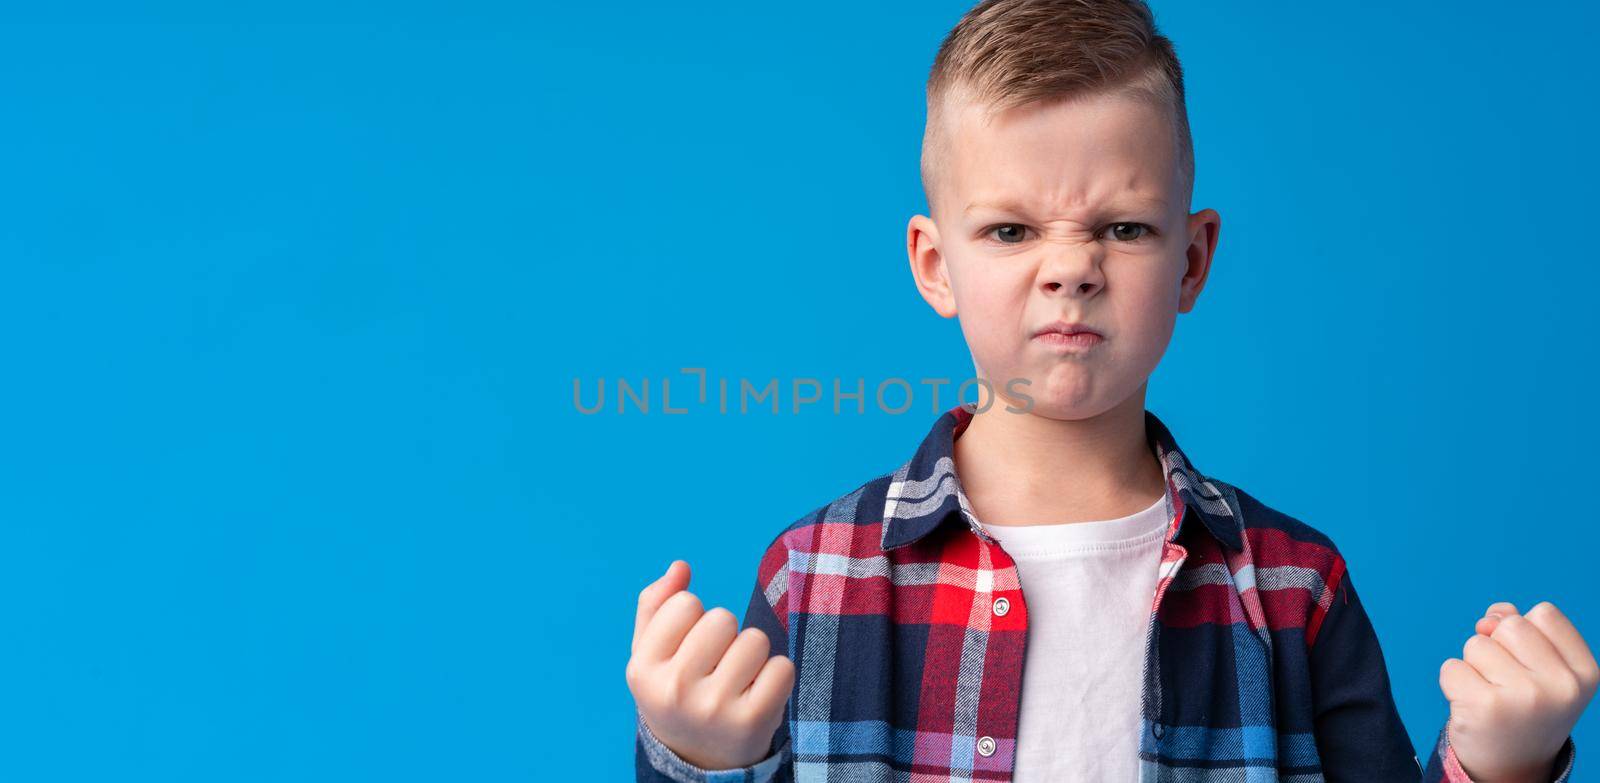 Portrait of angry little boy on blue background by Fabrikasimf